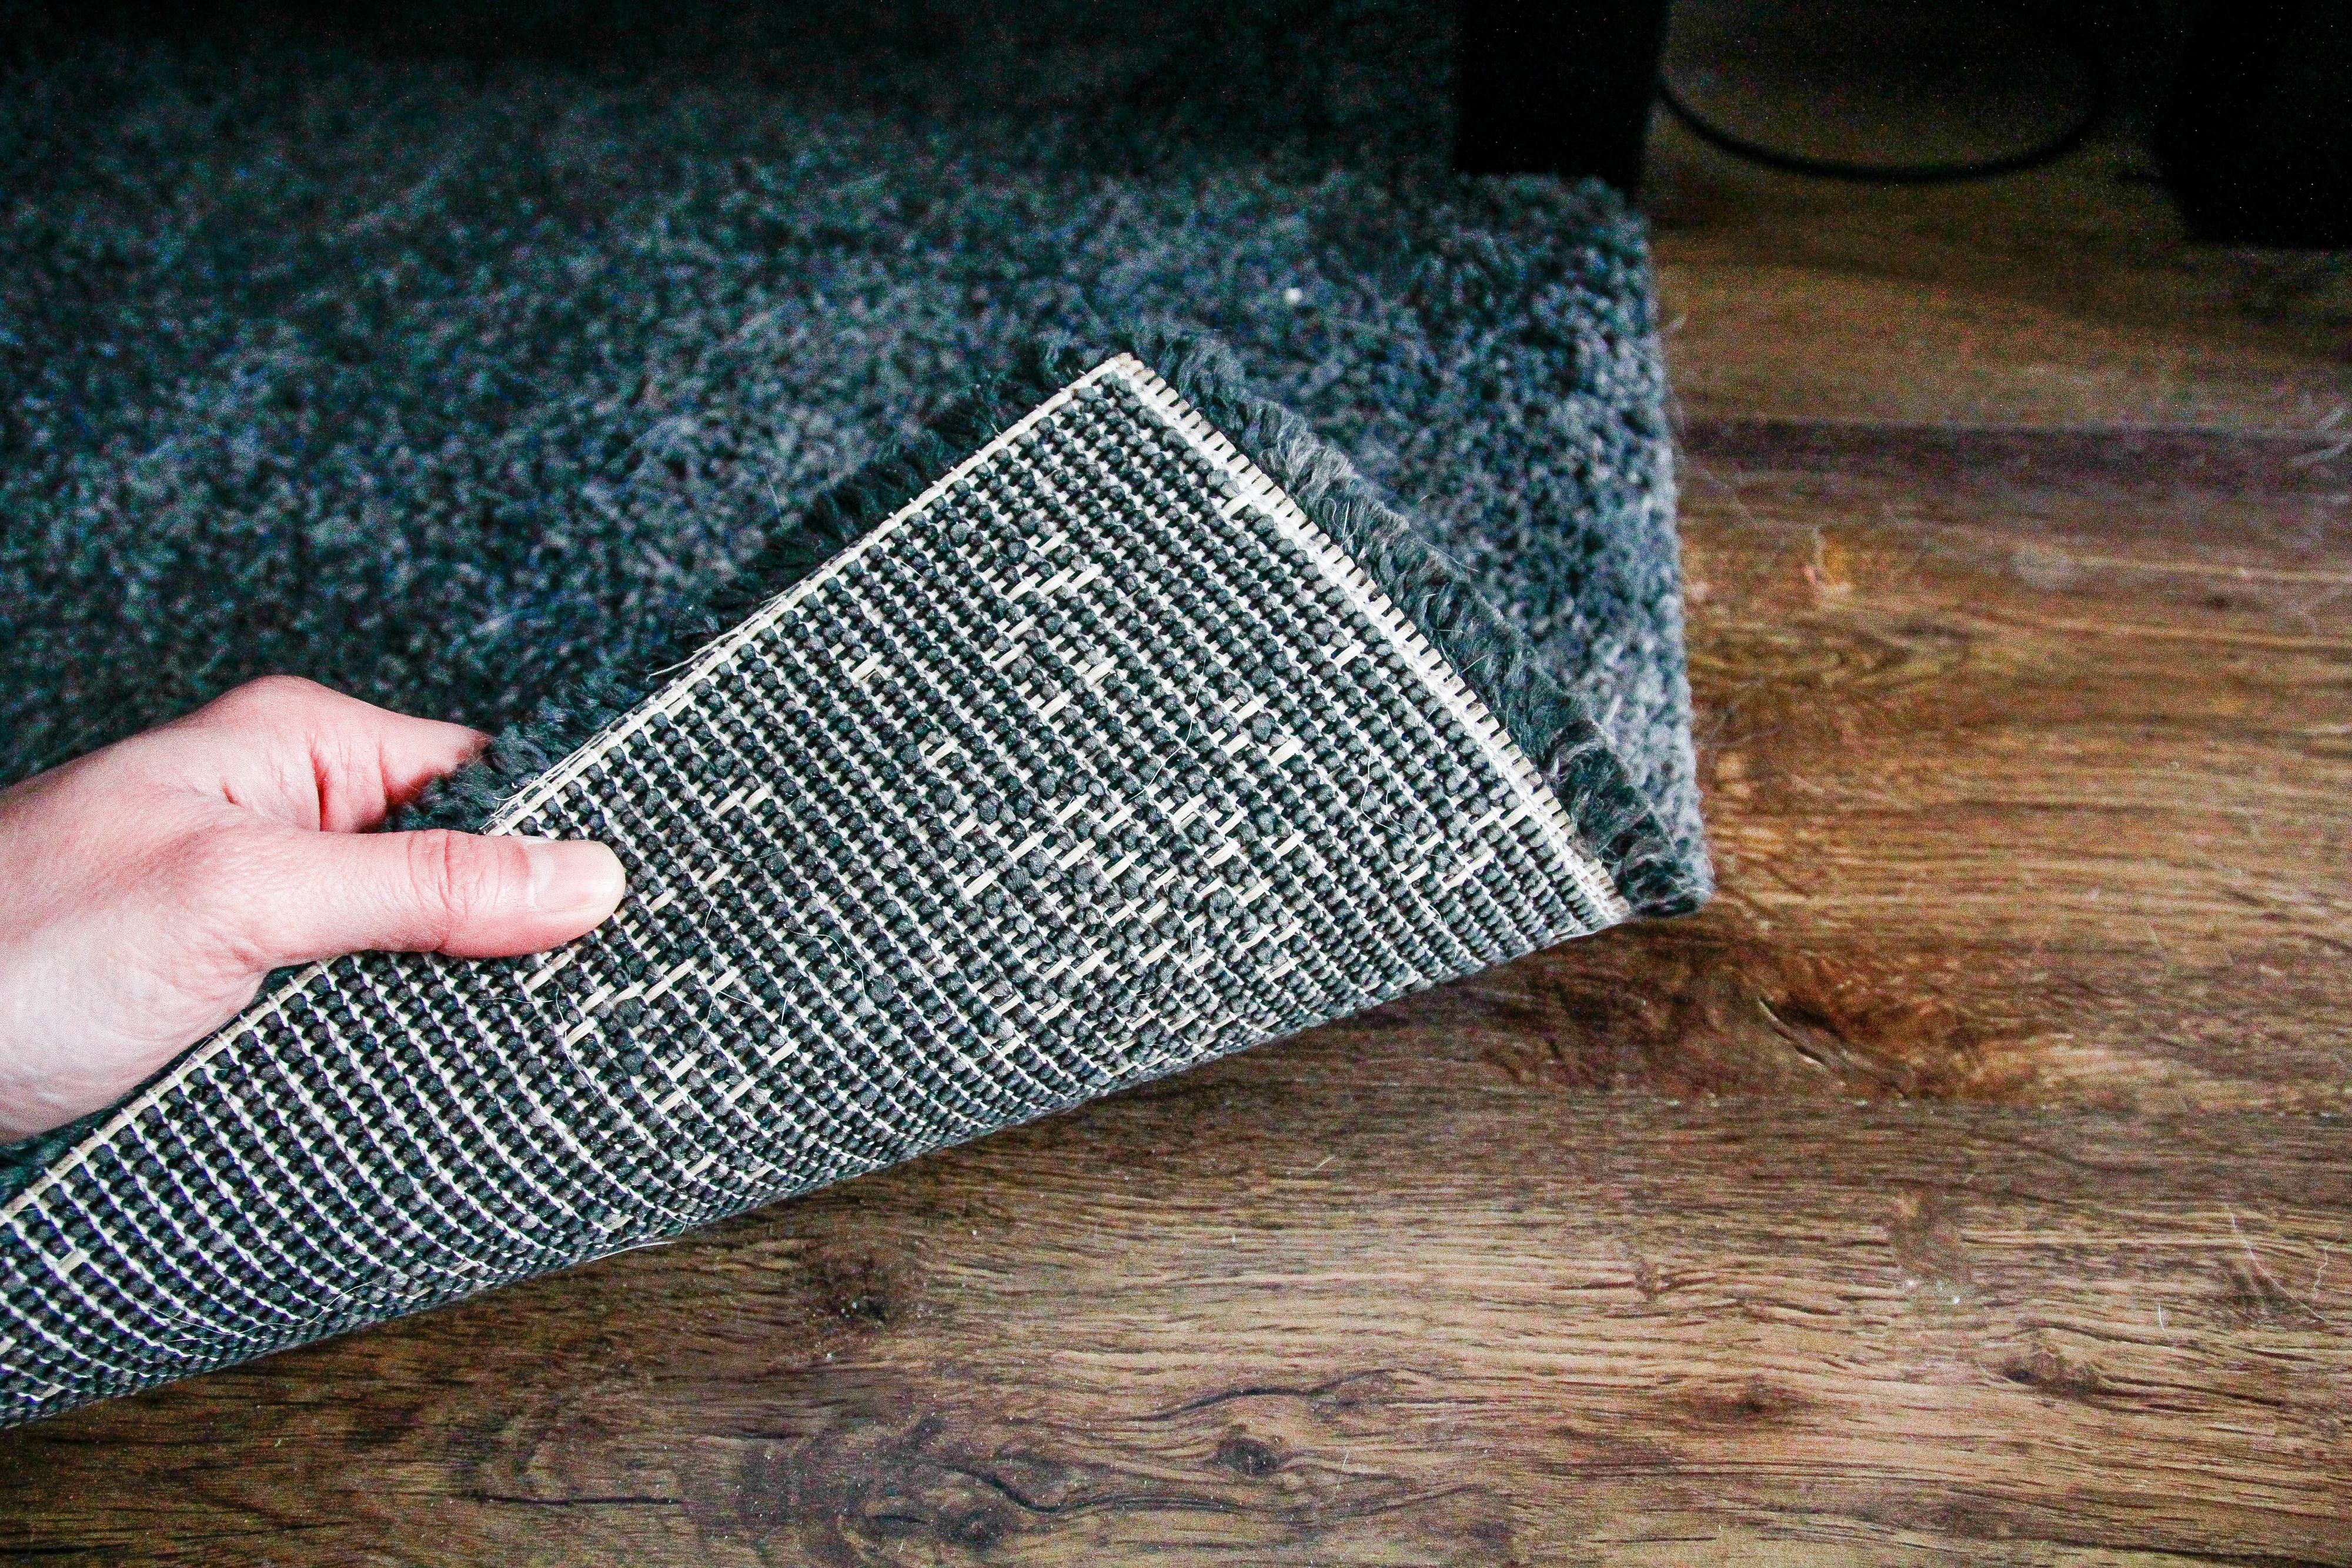 Person lifting corner of a textured rug to reveal wooden flooring underneath